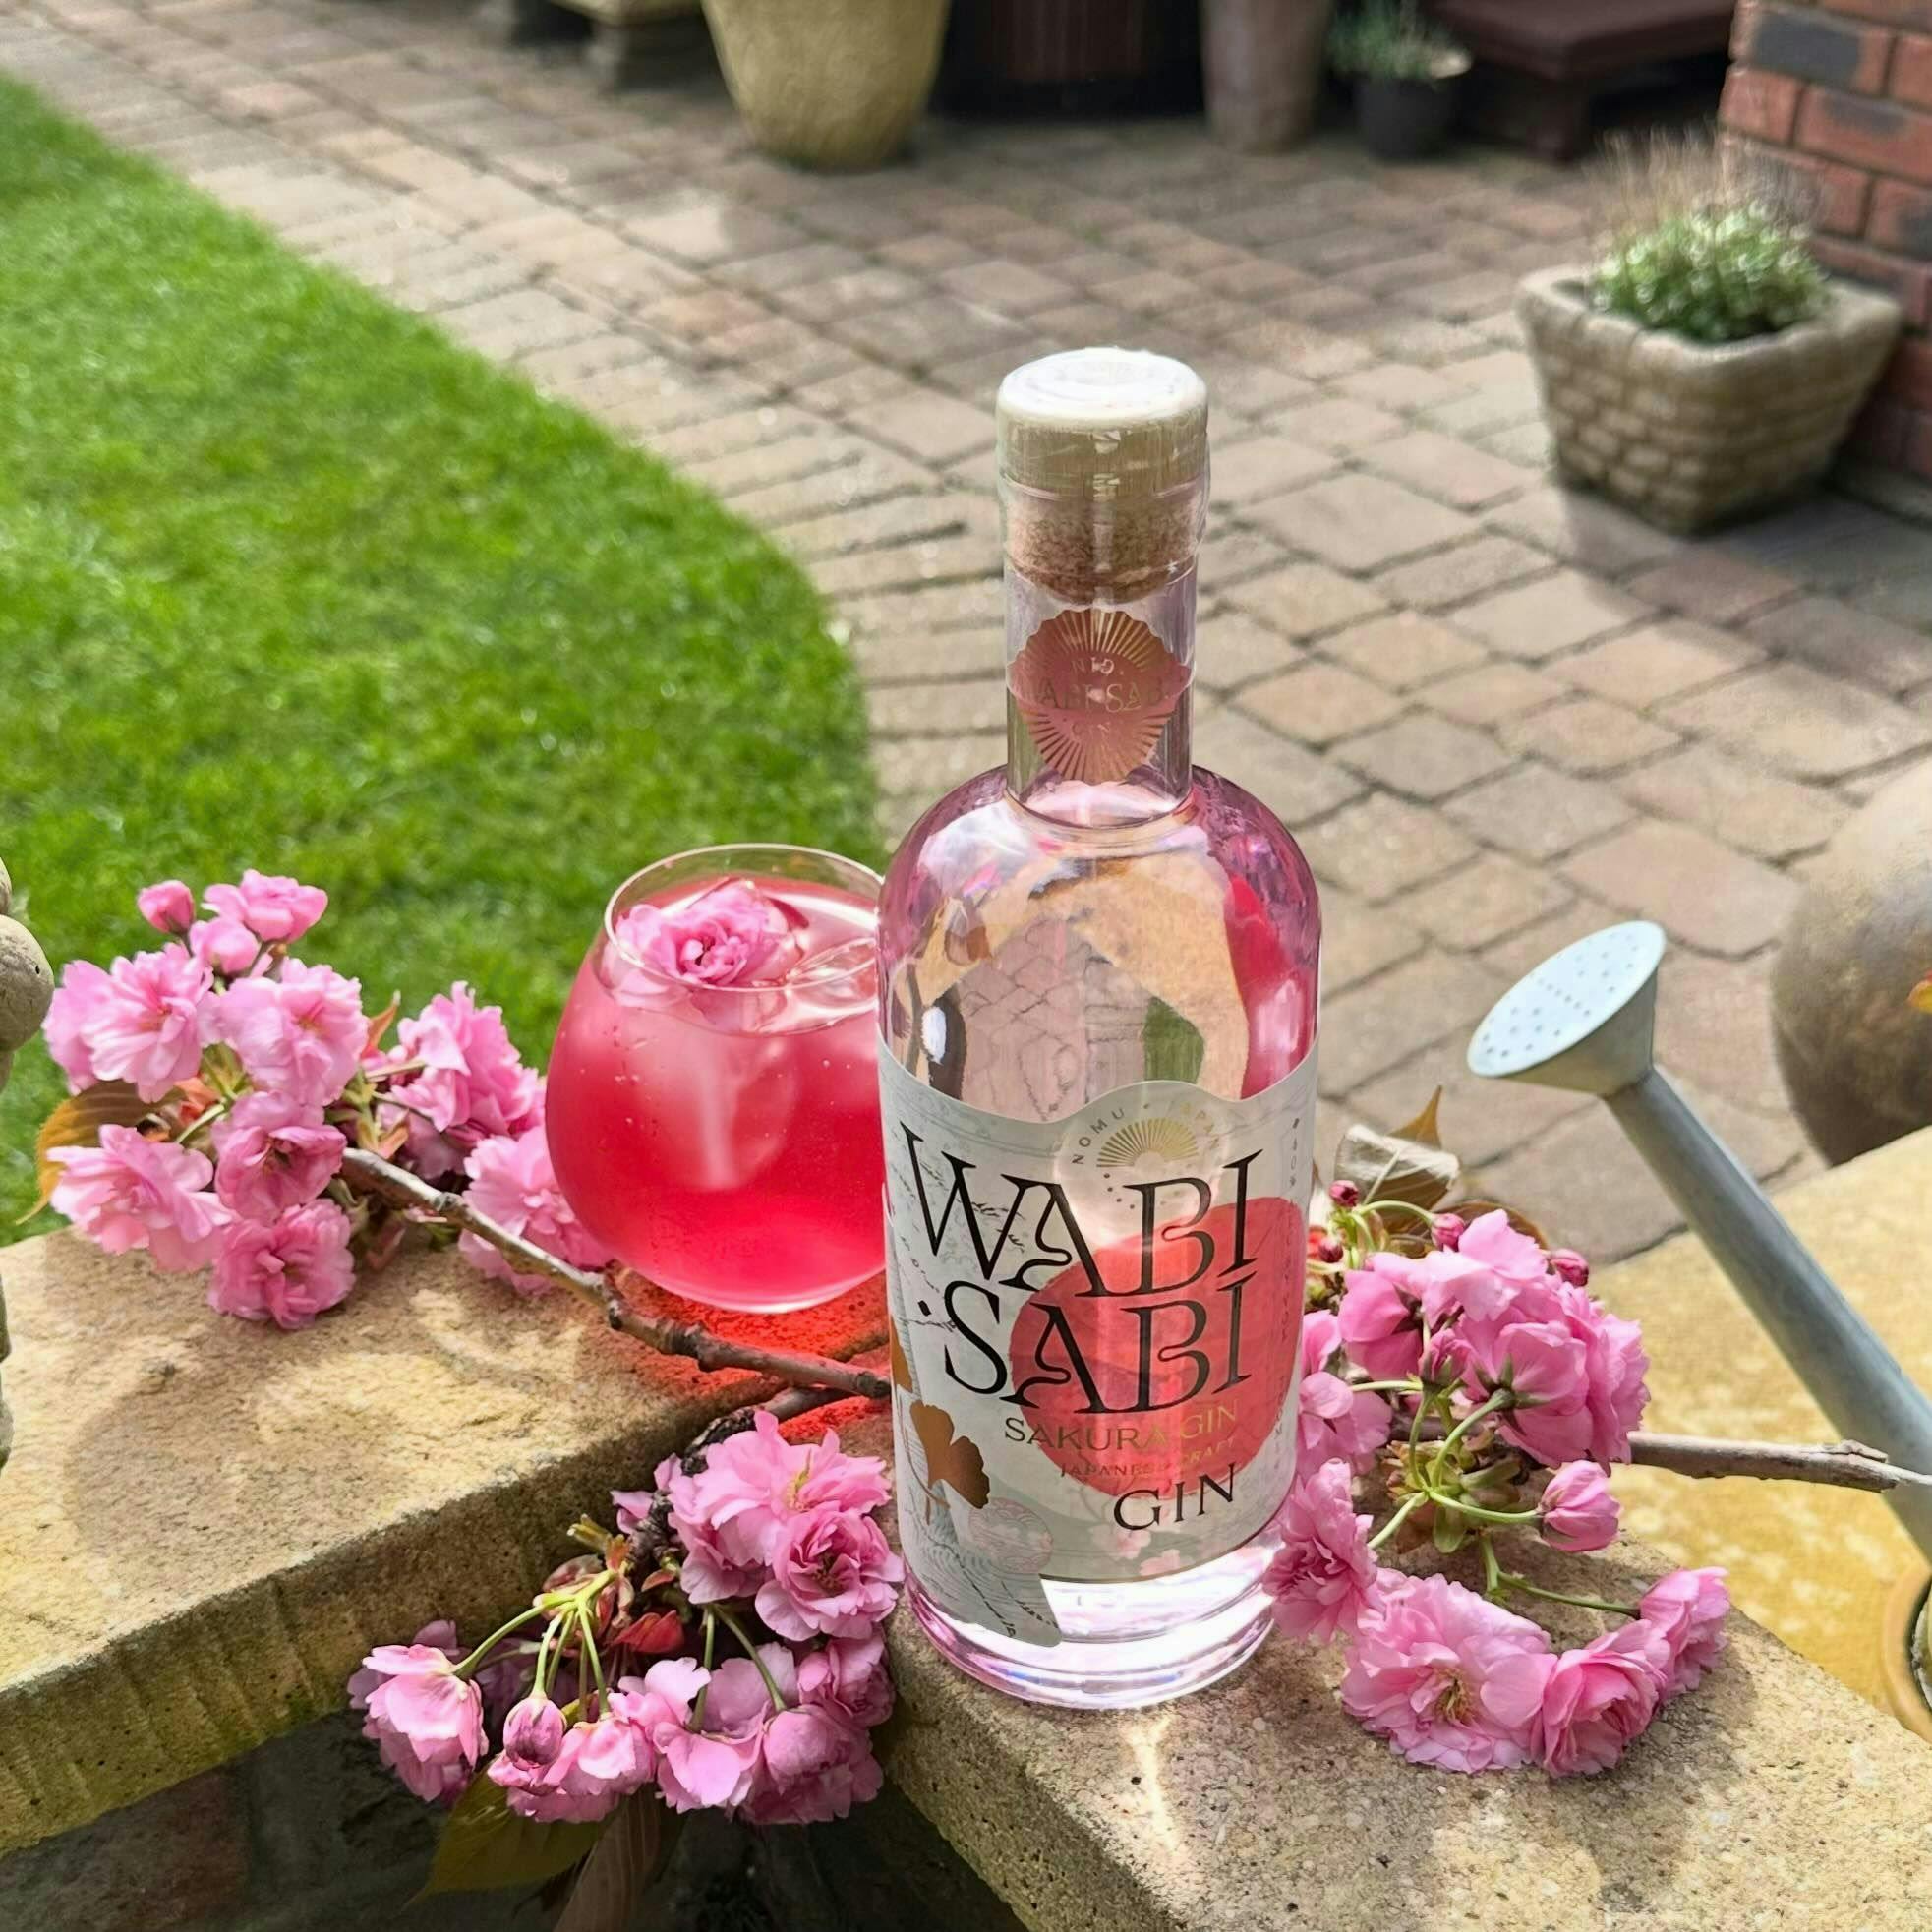 A white and pink labelled bottle of Wabi Sabi gin with a pink cocktail in the garden in the background and some cherry blossom next to the bottle and cocktail